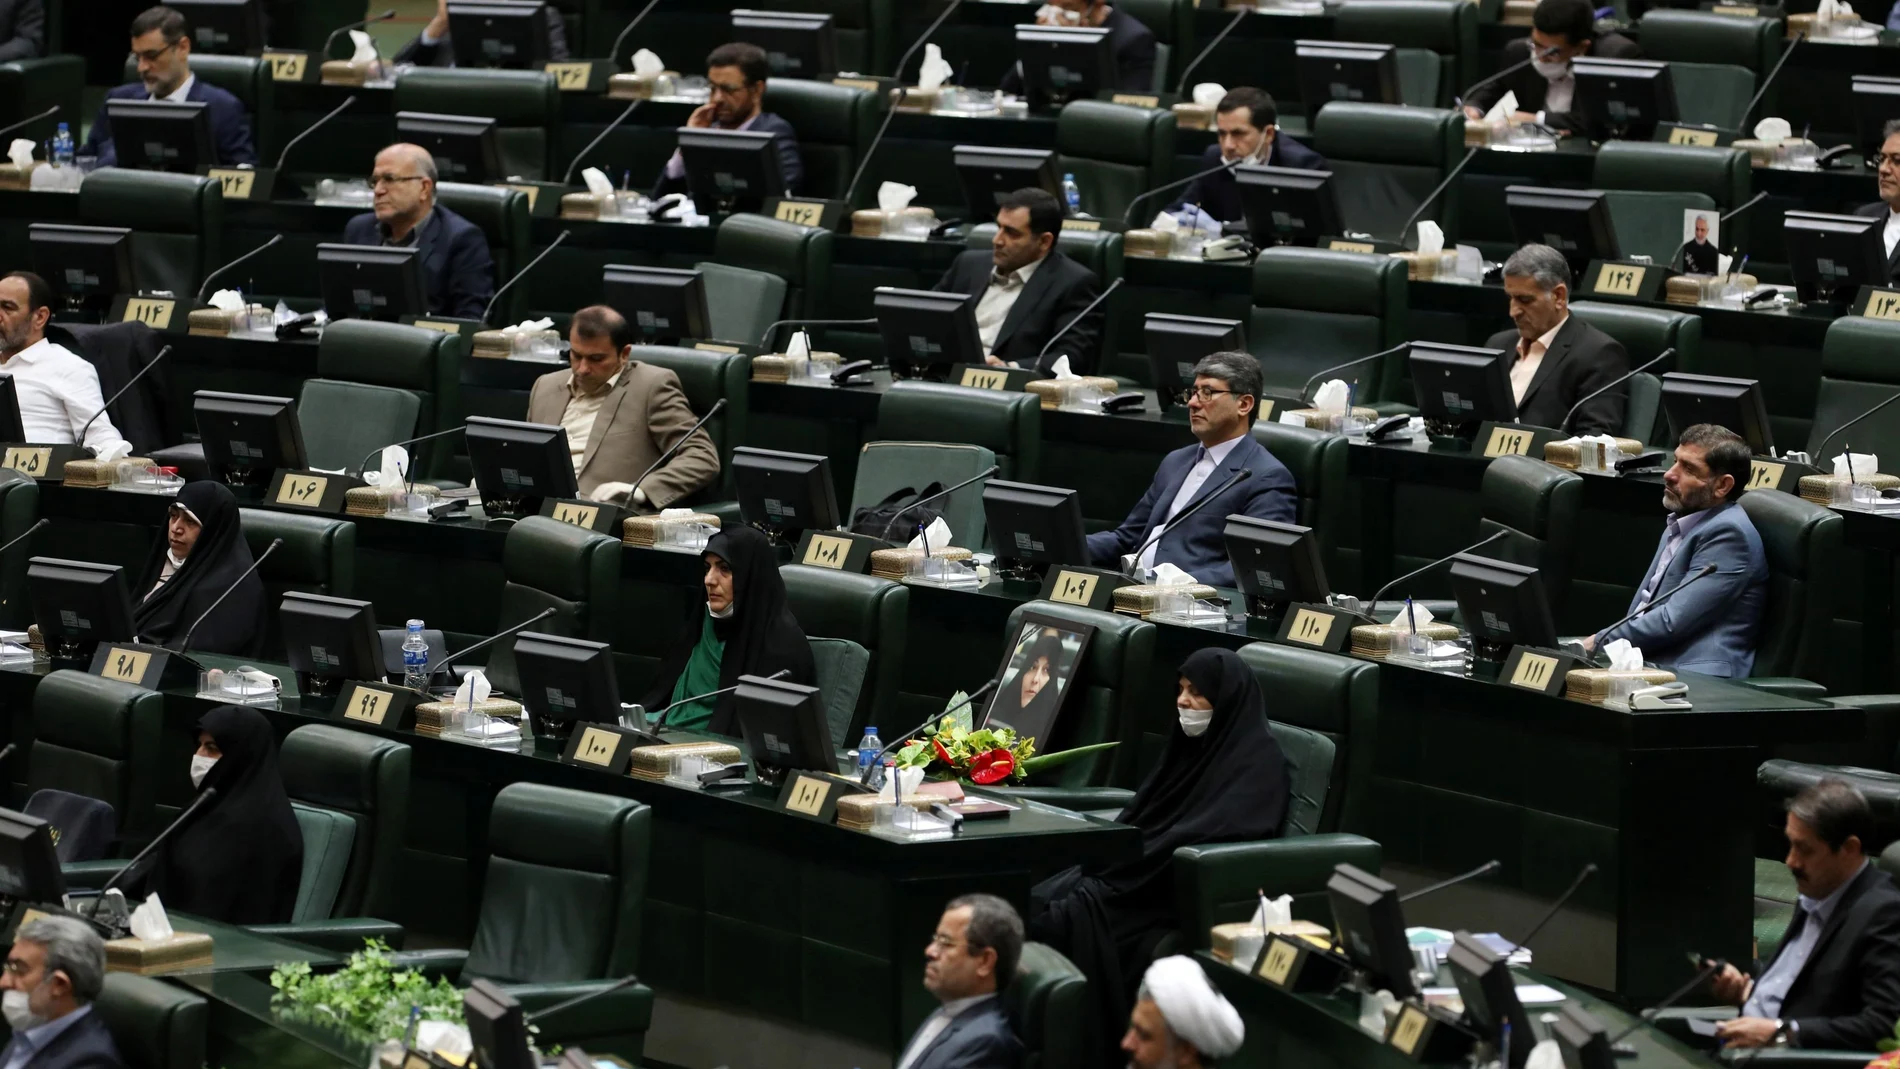 Iranian lawmakers attend the opening ceremony of Iran's 11th parliament, practicing social distancing as the spread of the coronavirus disease (COVID-19) continues, in Tehran